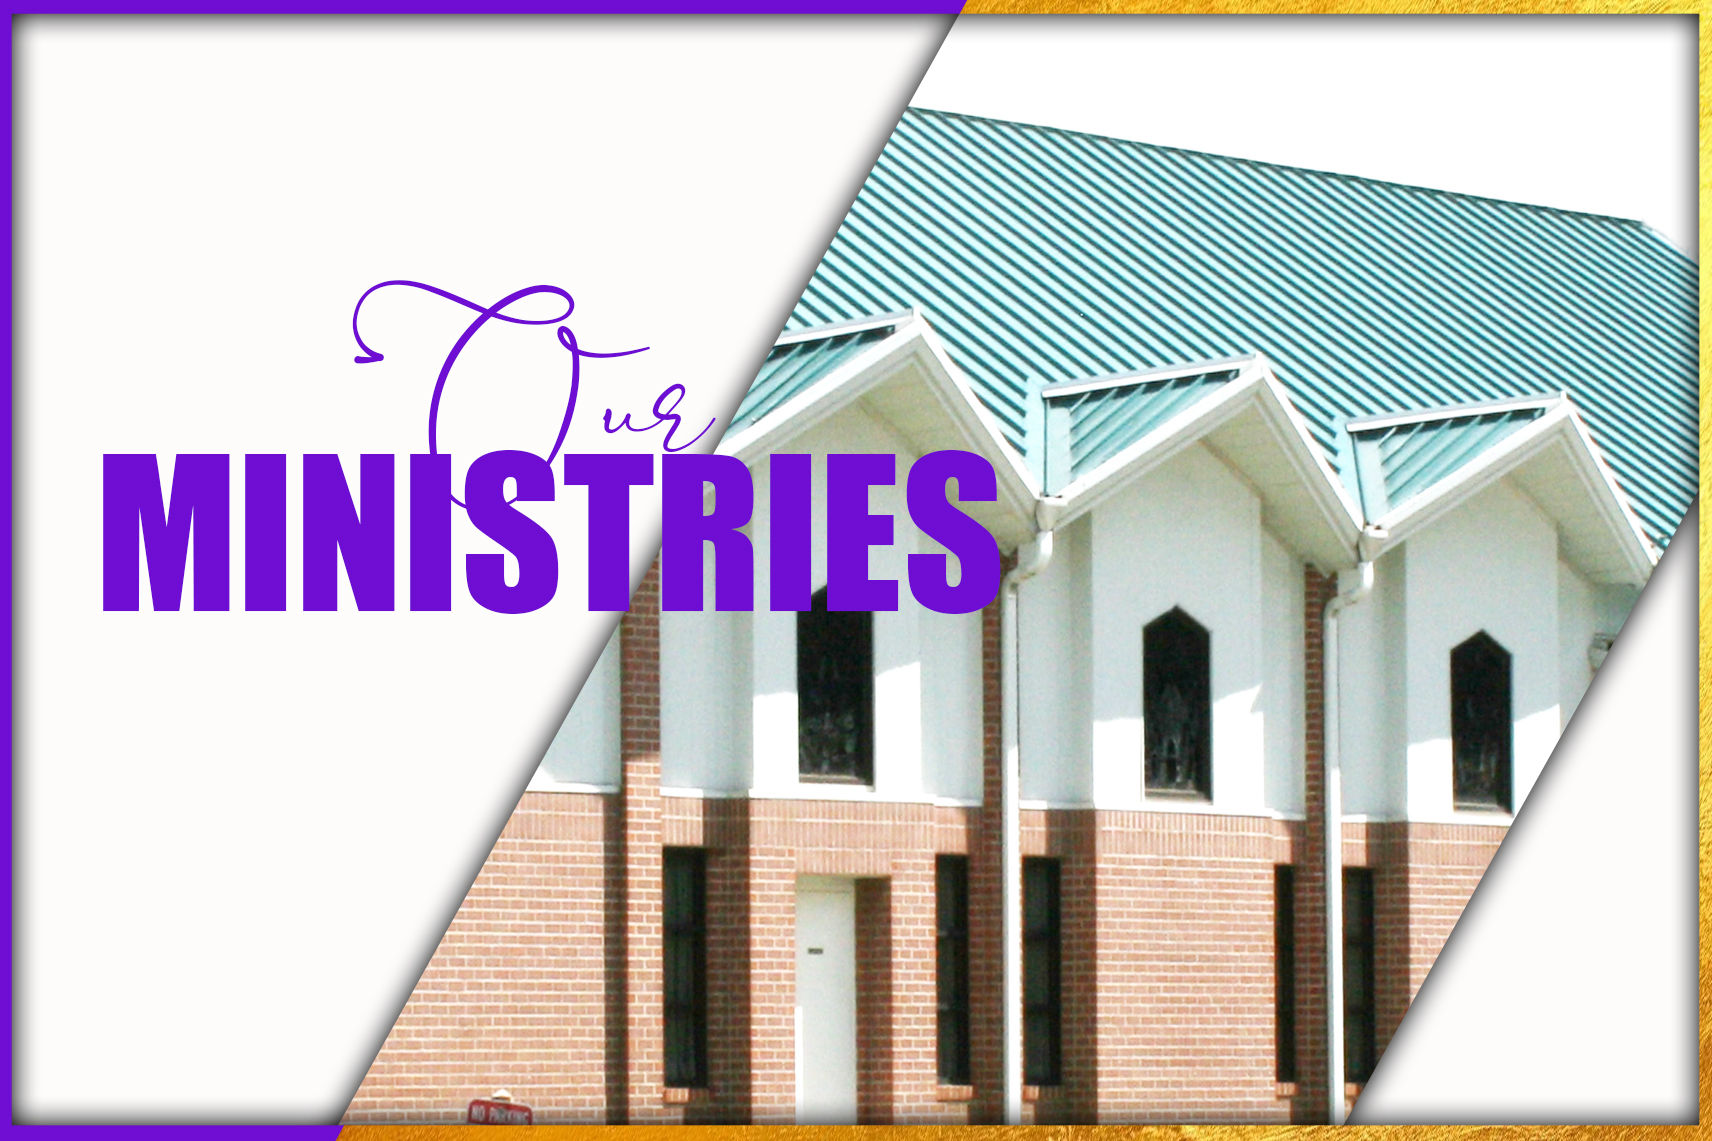 OUR MINISTRIES